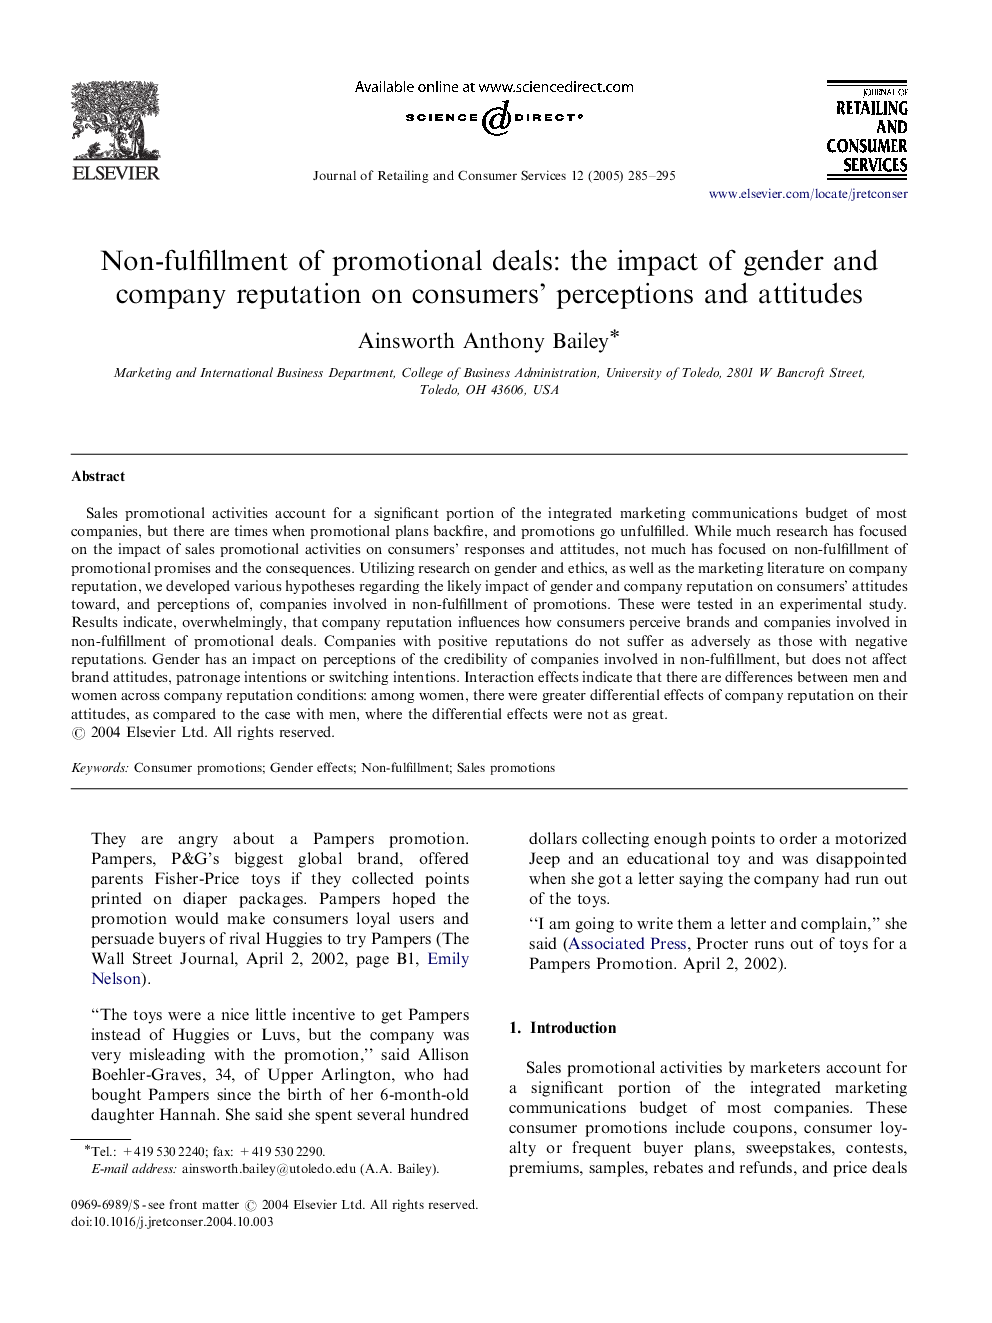 Non-fulfillment of promotional deals: the impact of gender and company reputation on consumers' perceptions and attitudes